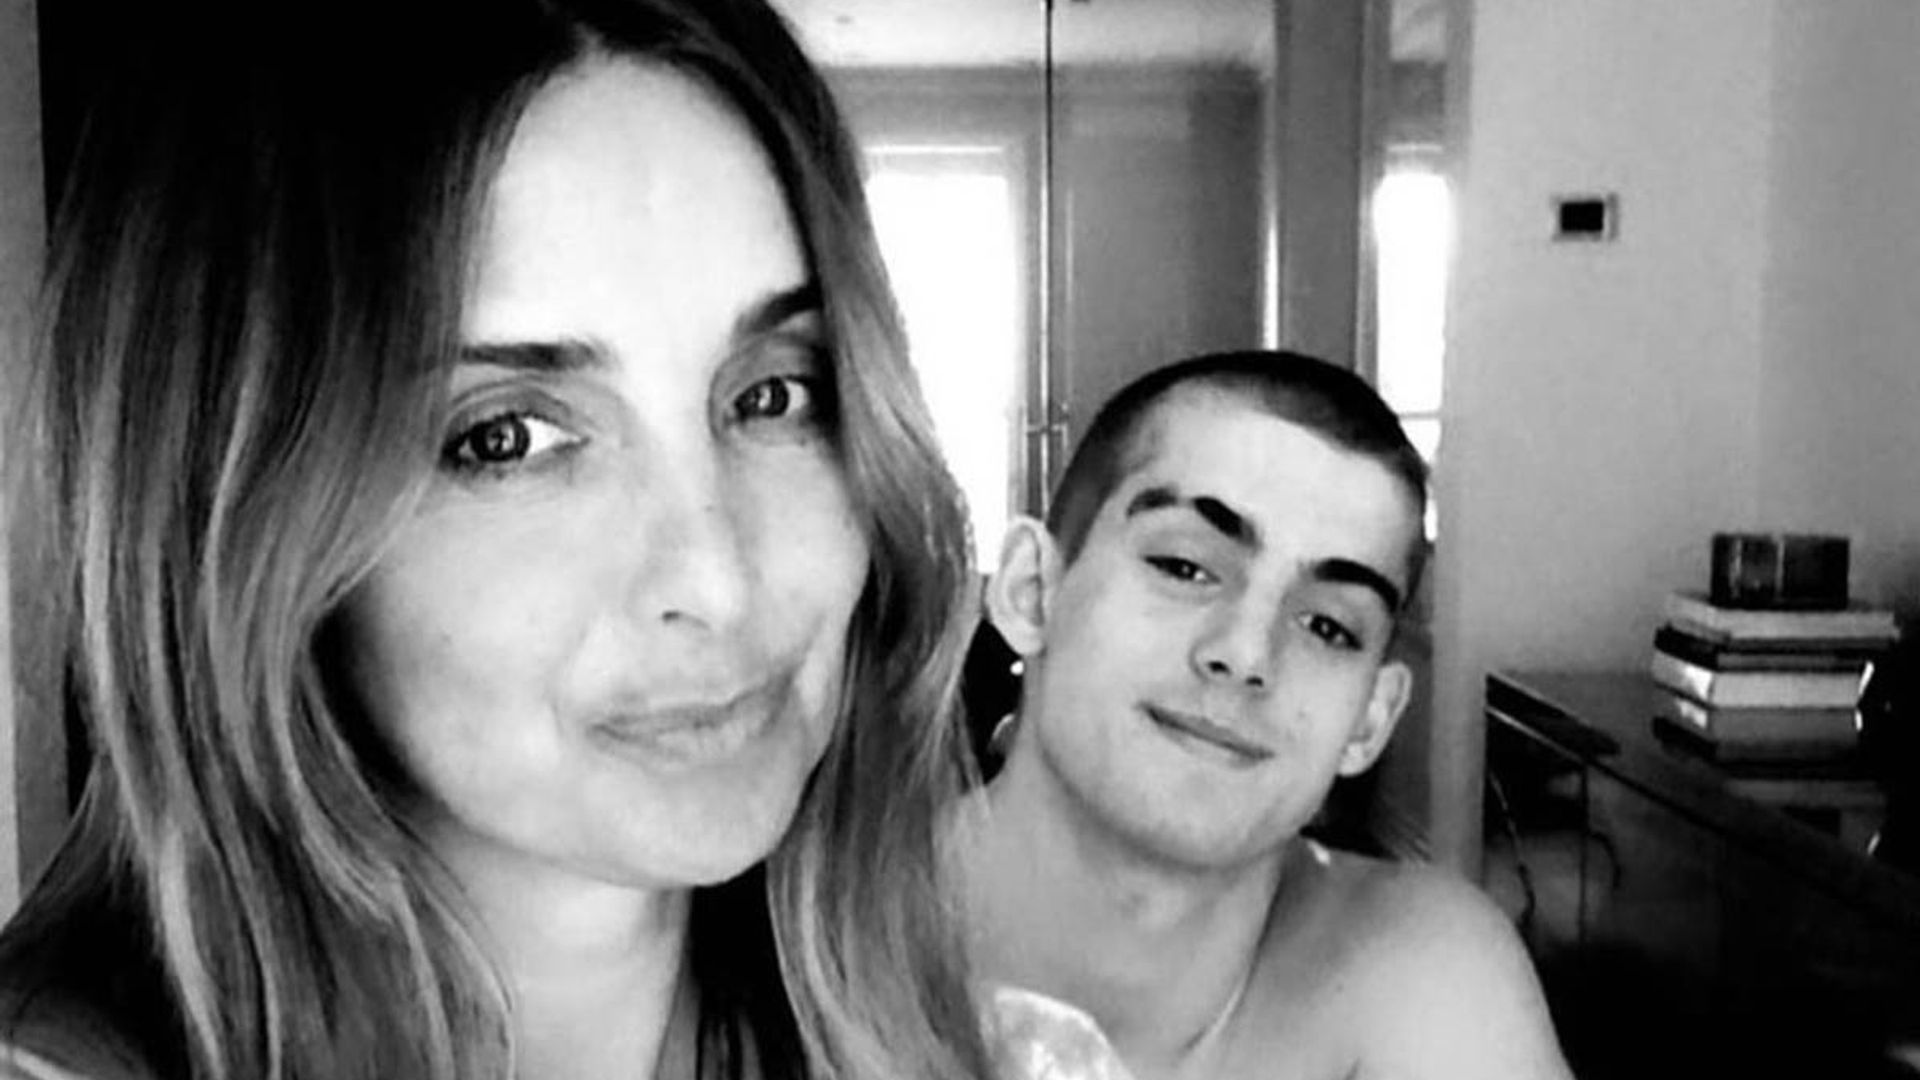 Louise Redknapp shares rare picture of topless lookalike son Charley